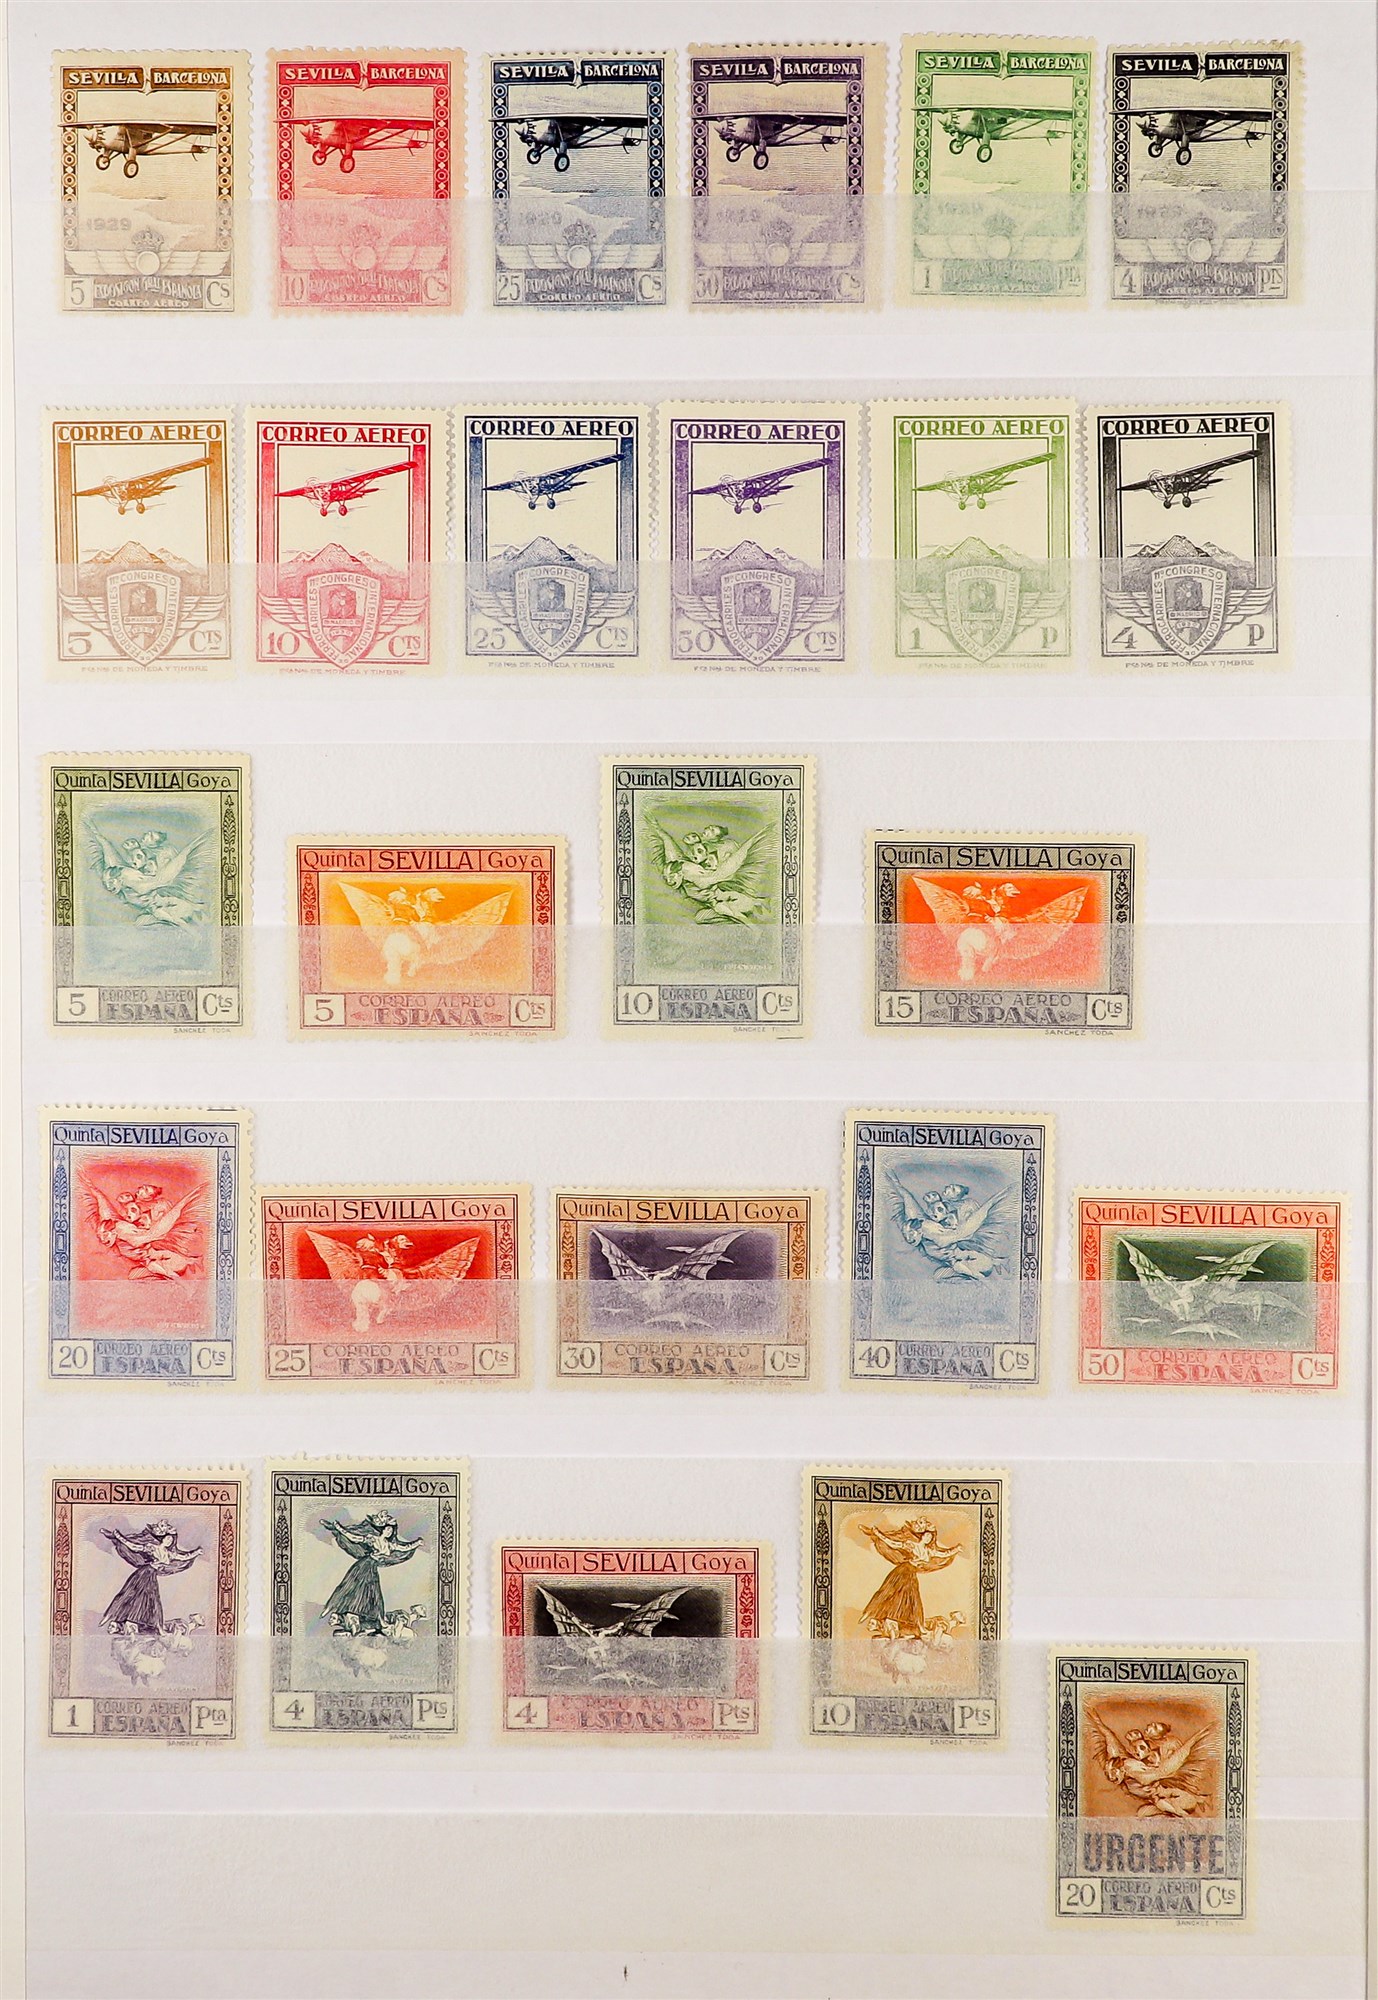 SPAIN 1920 - 1952 AIR POST STAMPS collection of over 150 mint stamps on protective pages, many sets. - Image 2 of 6